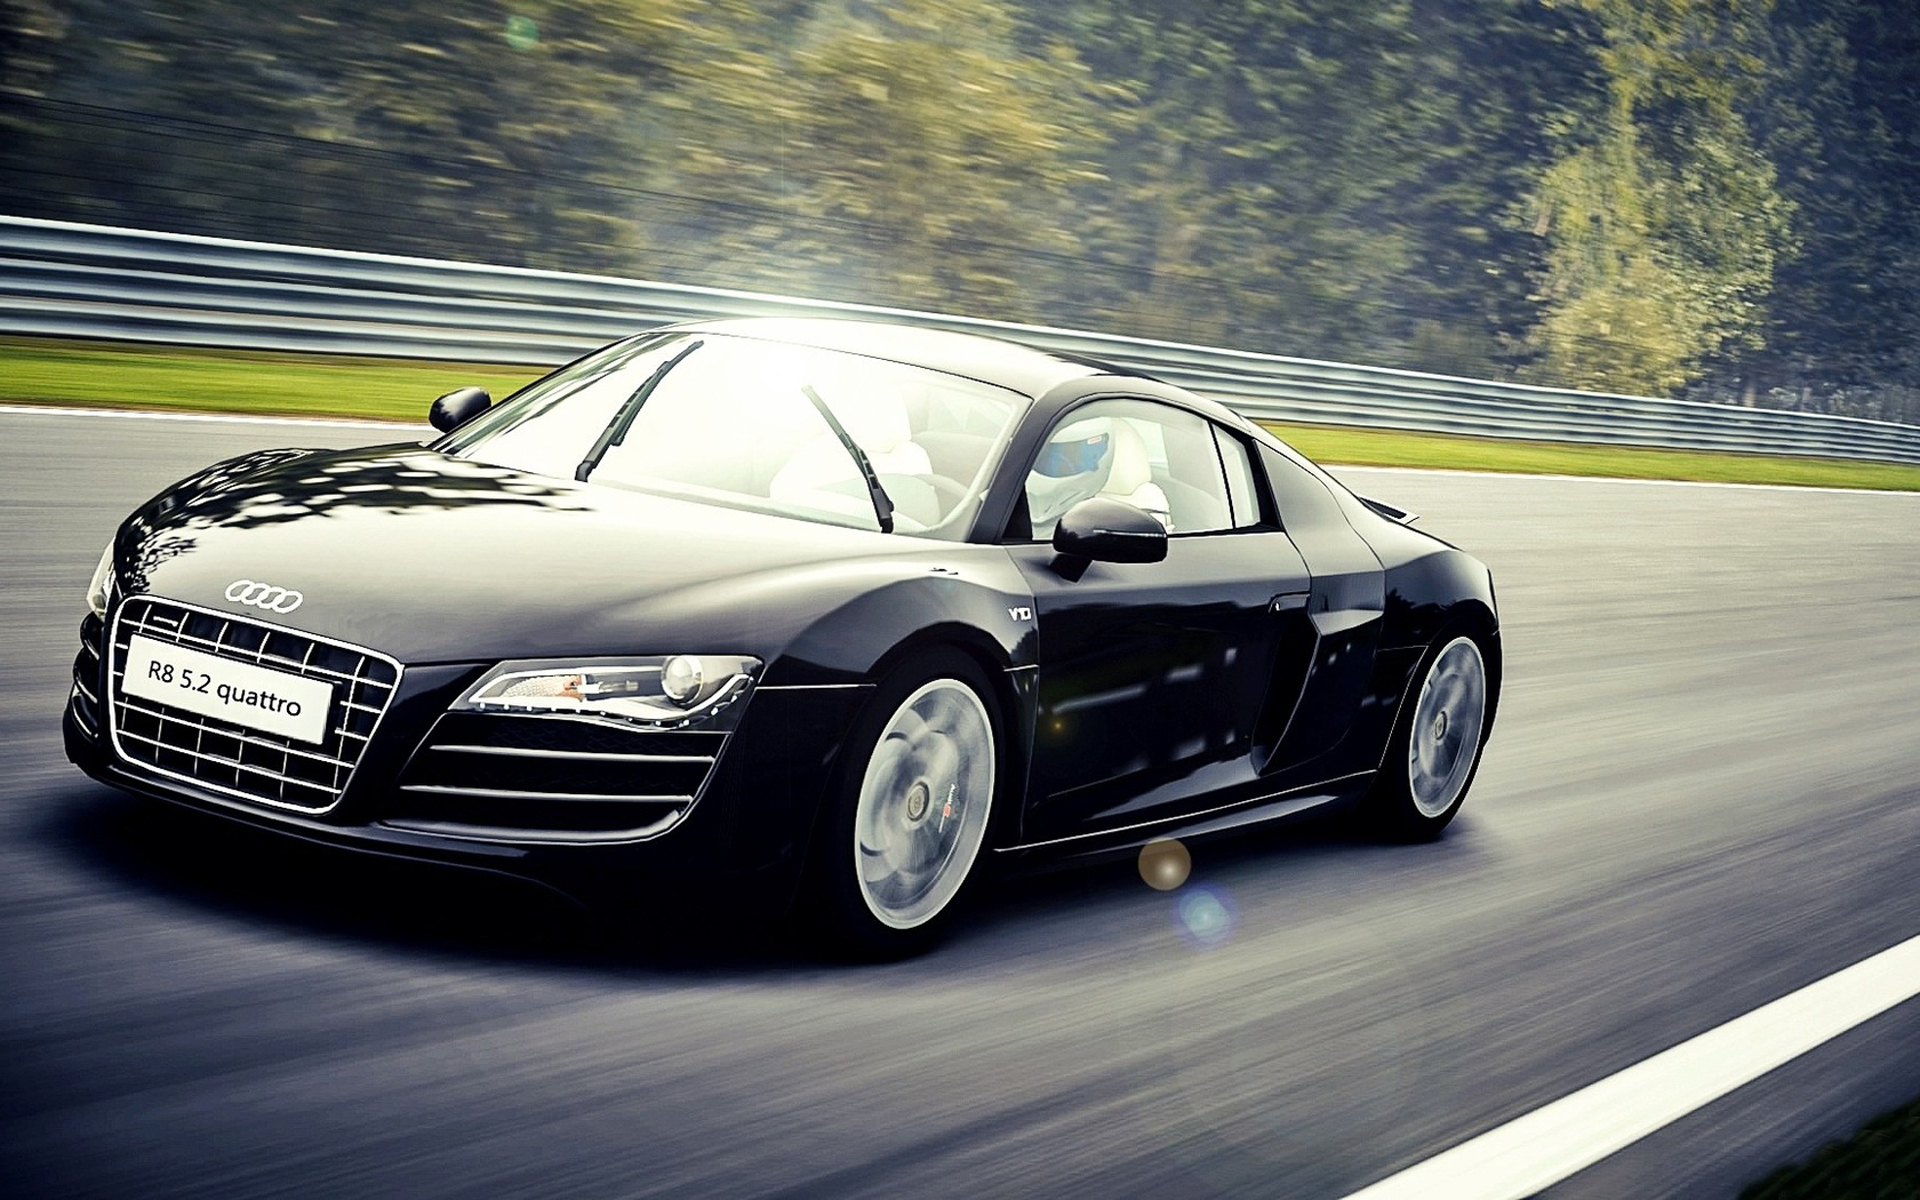 Audi R8 Wallpapers, Pictures, Images